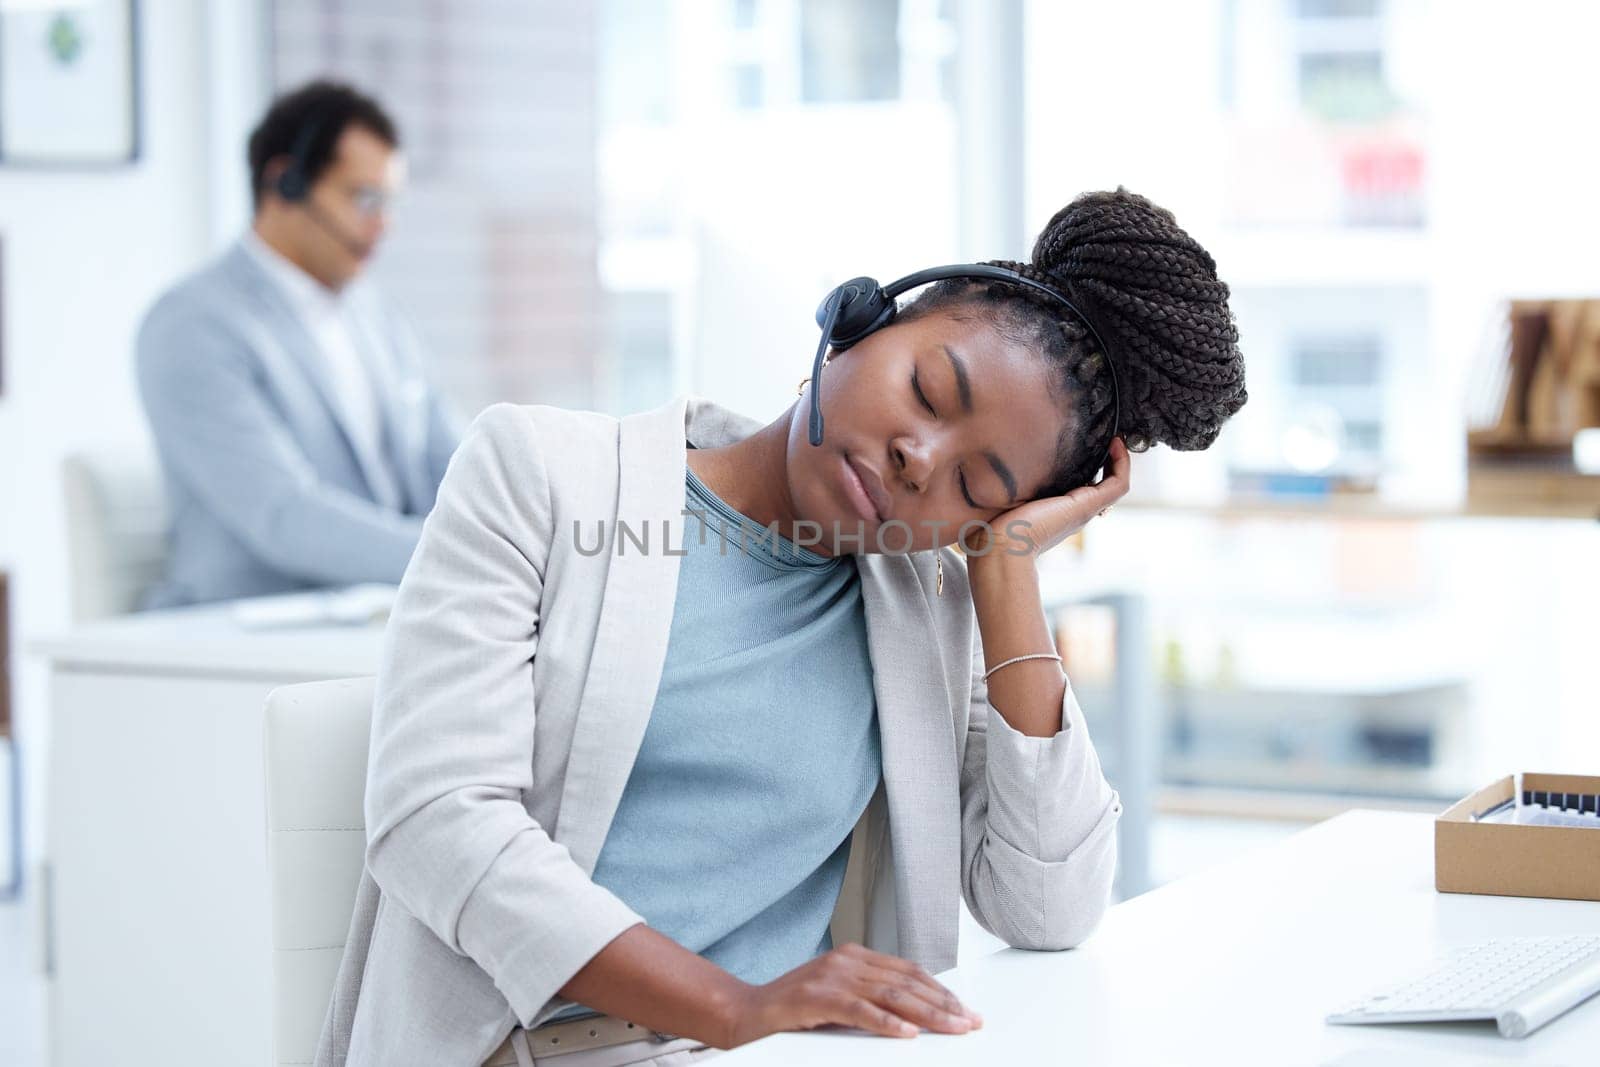 Call center, tired and woman sleeping with headset for telemarketing, sales or customer service. Black female consultant or agent at crm, tech support or help desk with stress, burnout or fatigue.